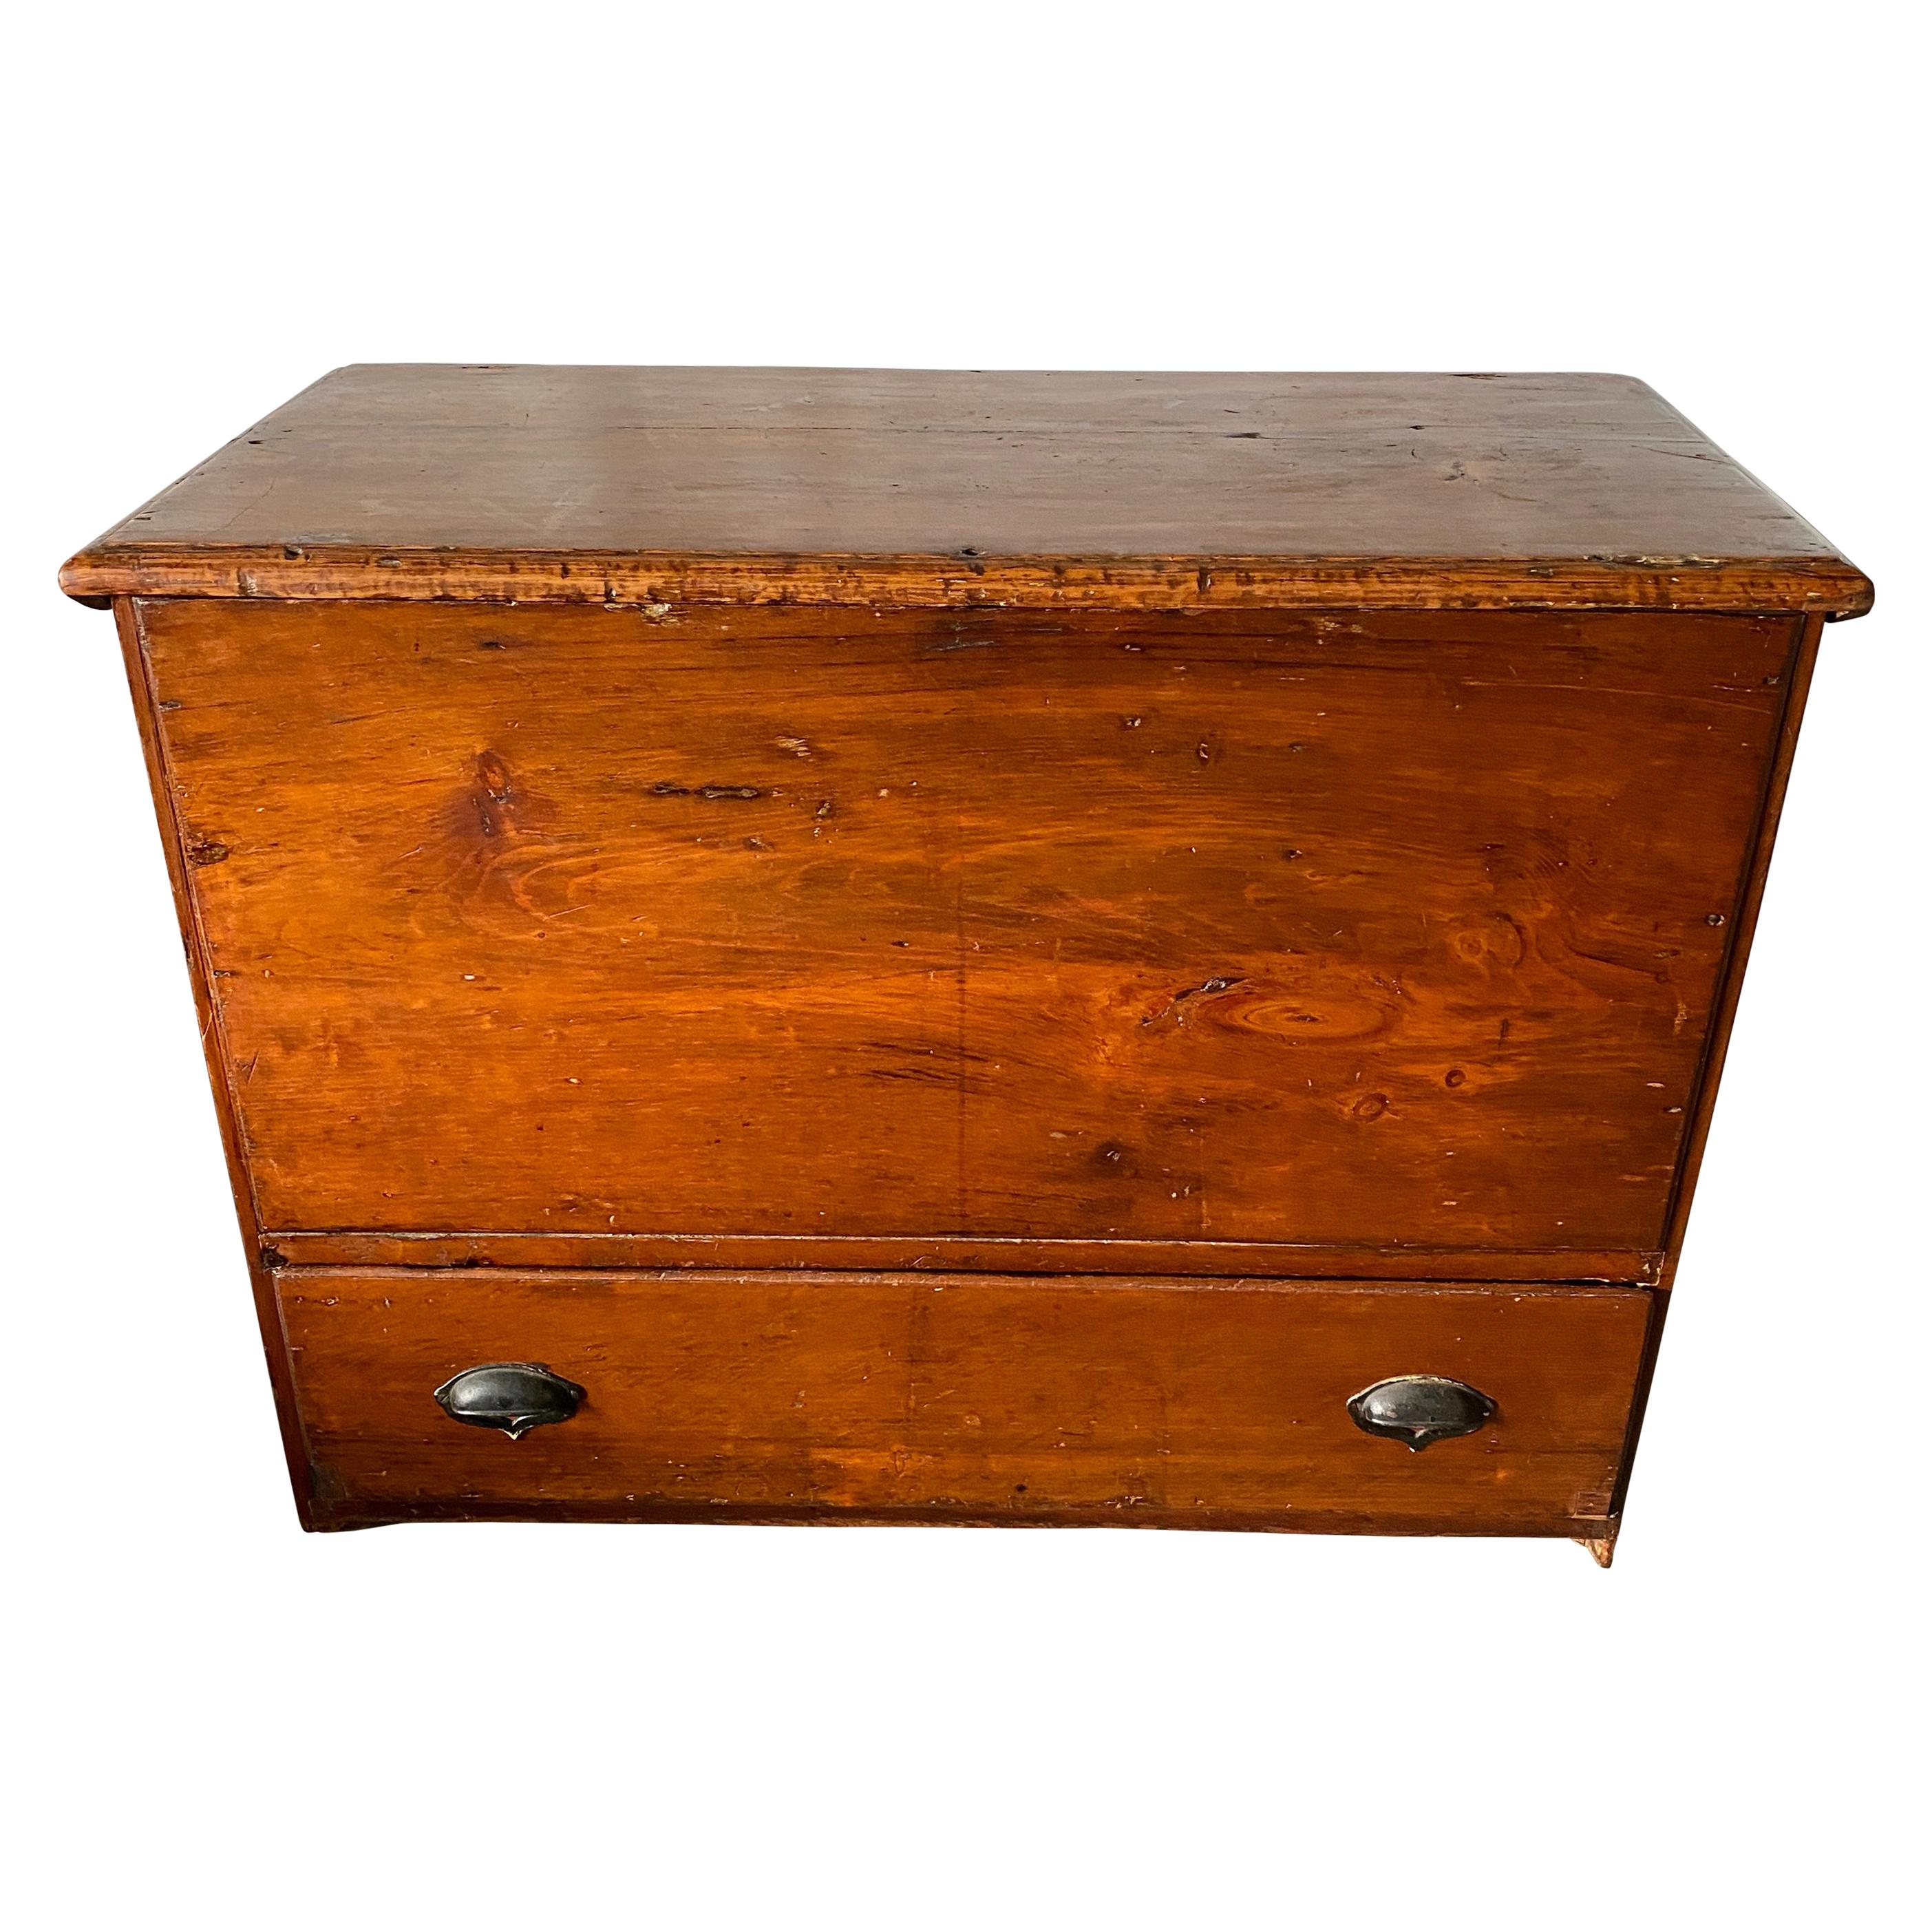 Early American Tall Blanket Chest with One Drawer